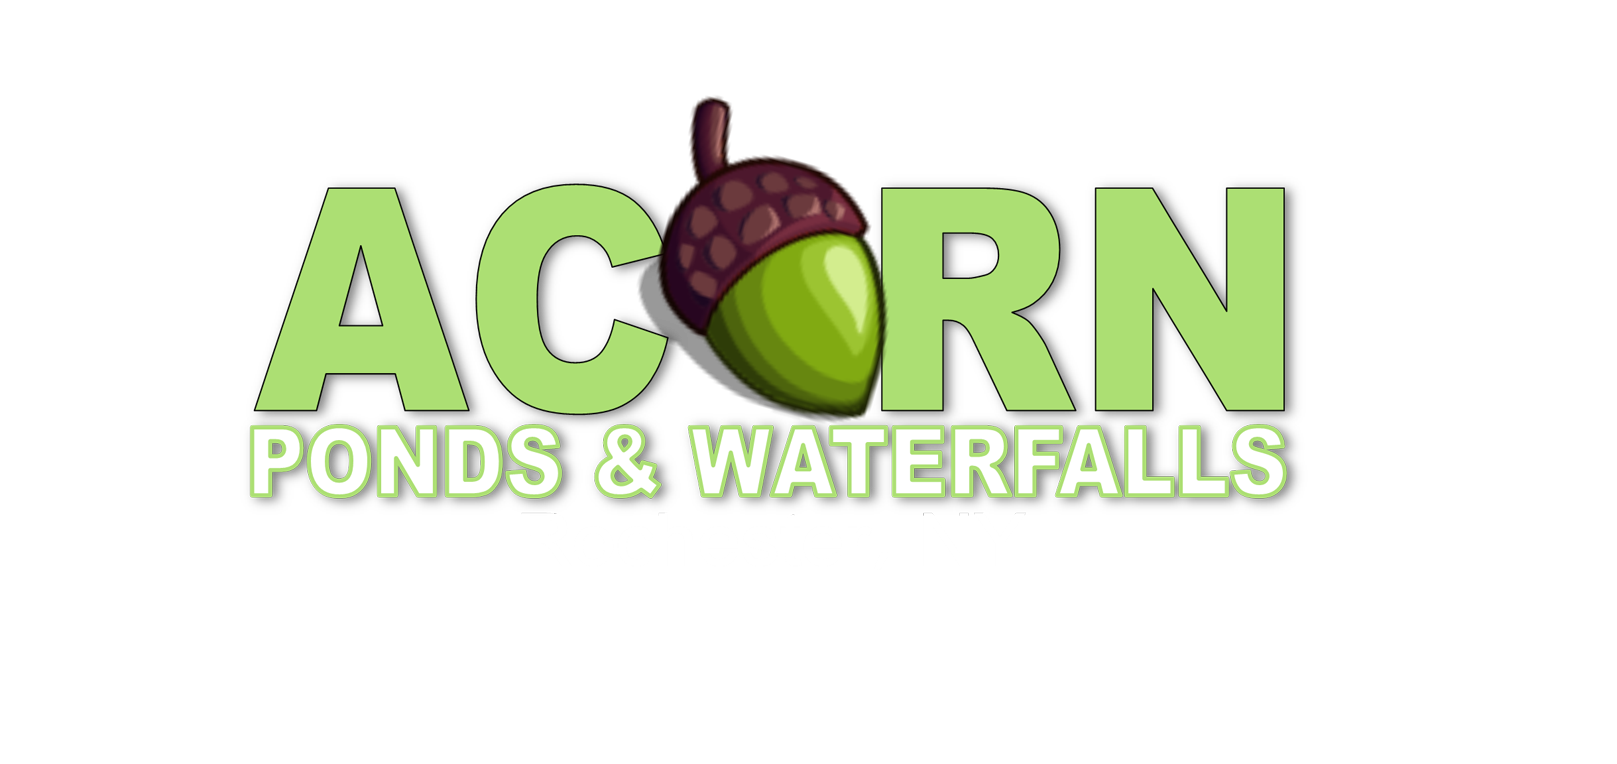 Pond (Rubber) Liner|Replacement|Repair|Service|NY|Acorn Ponds & Waterfalls